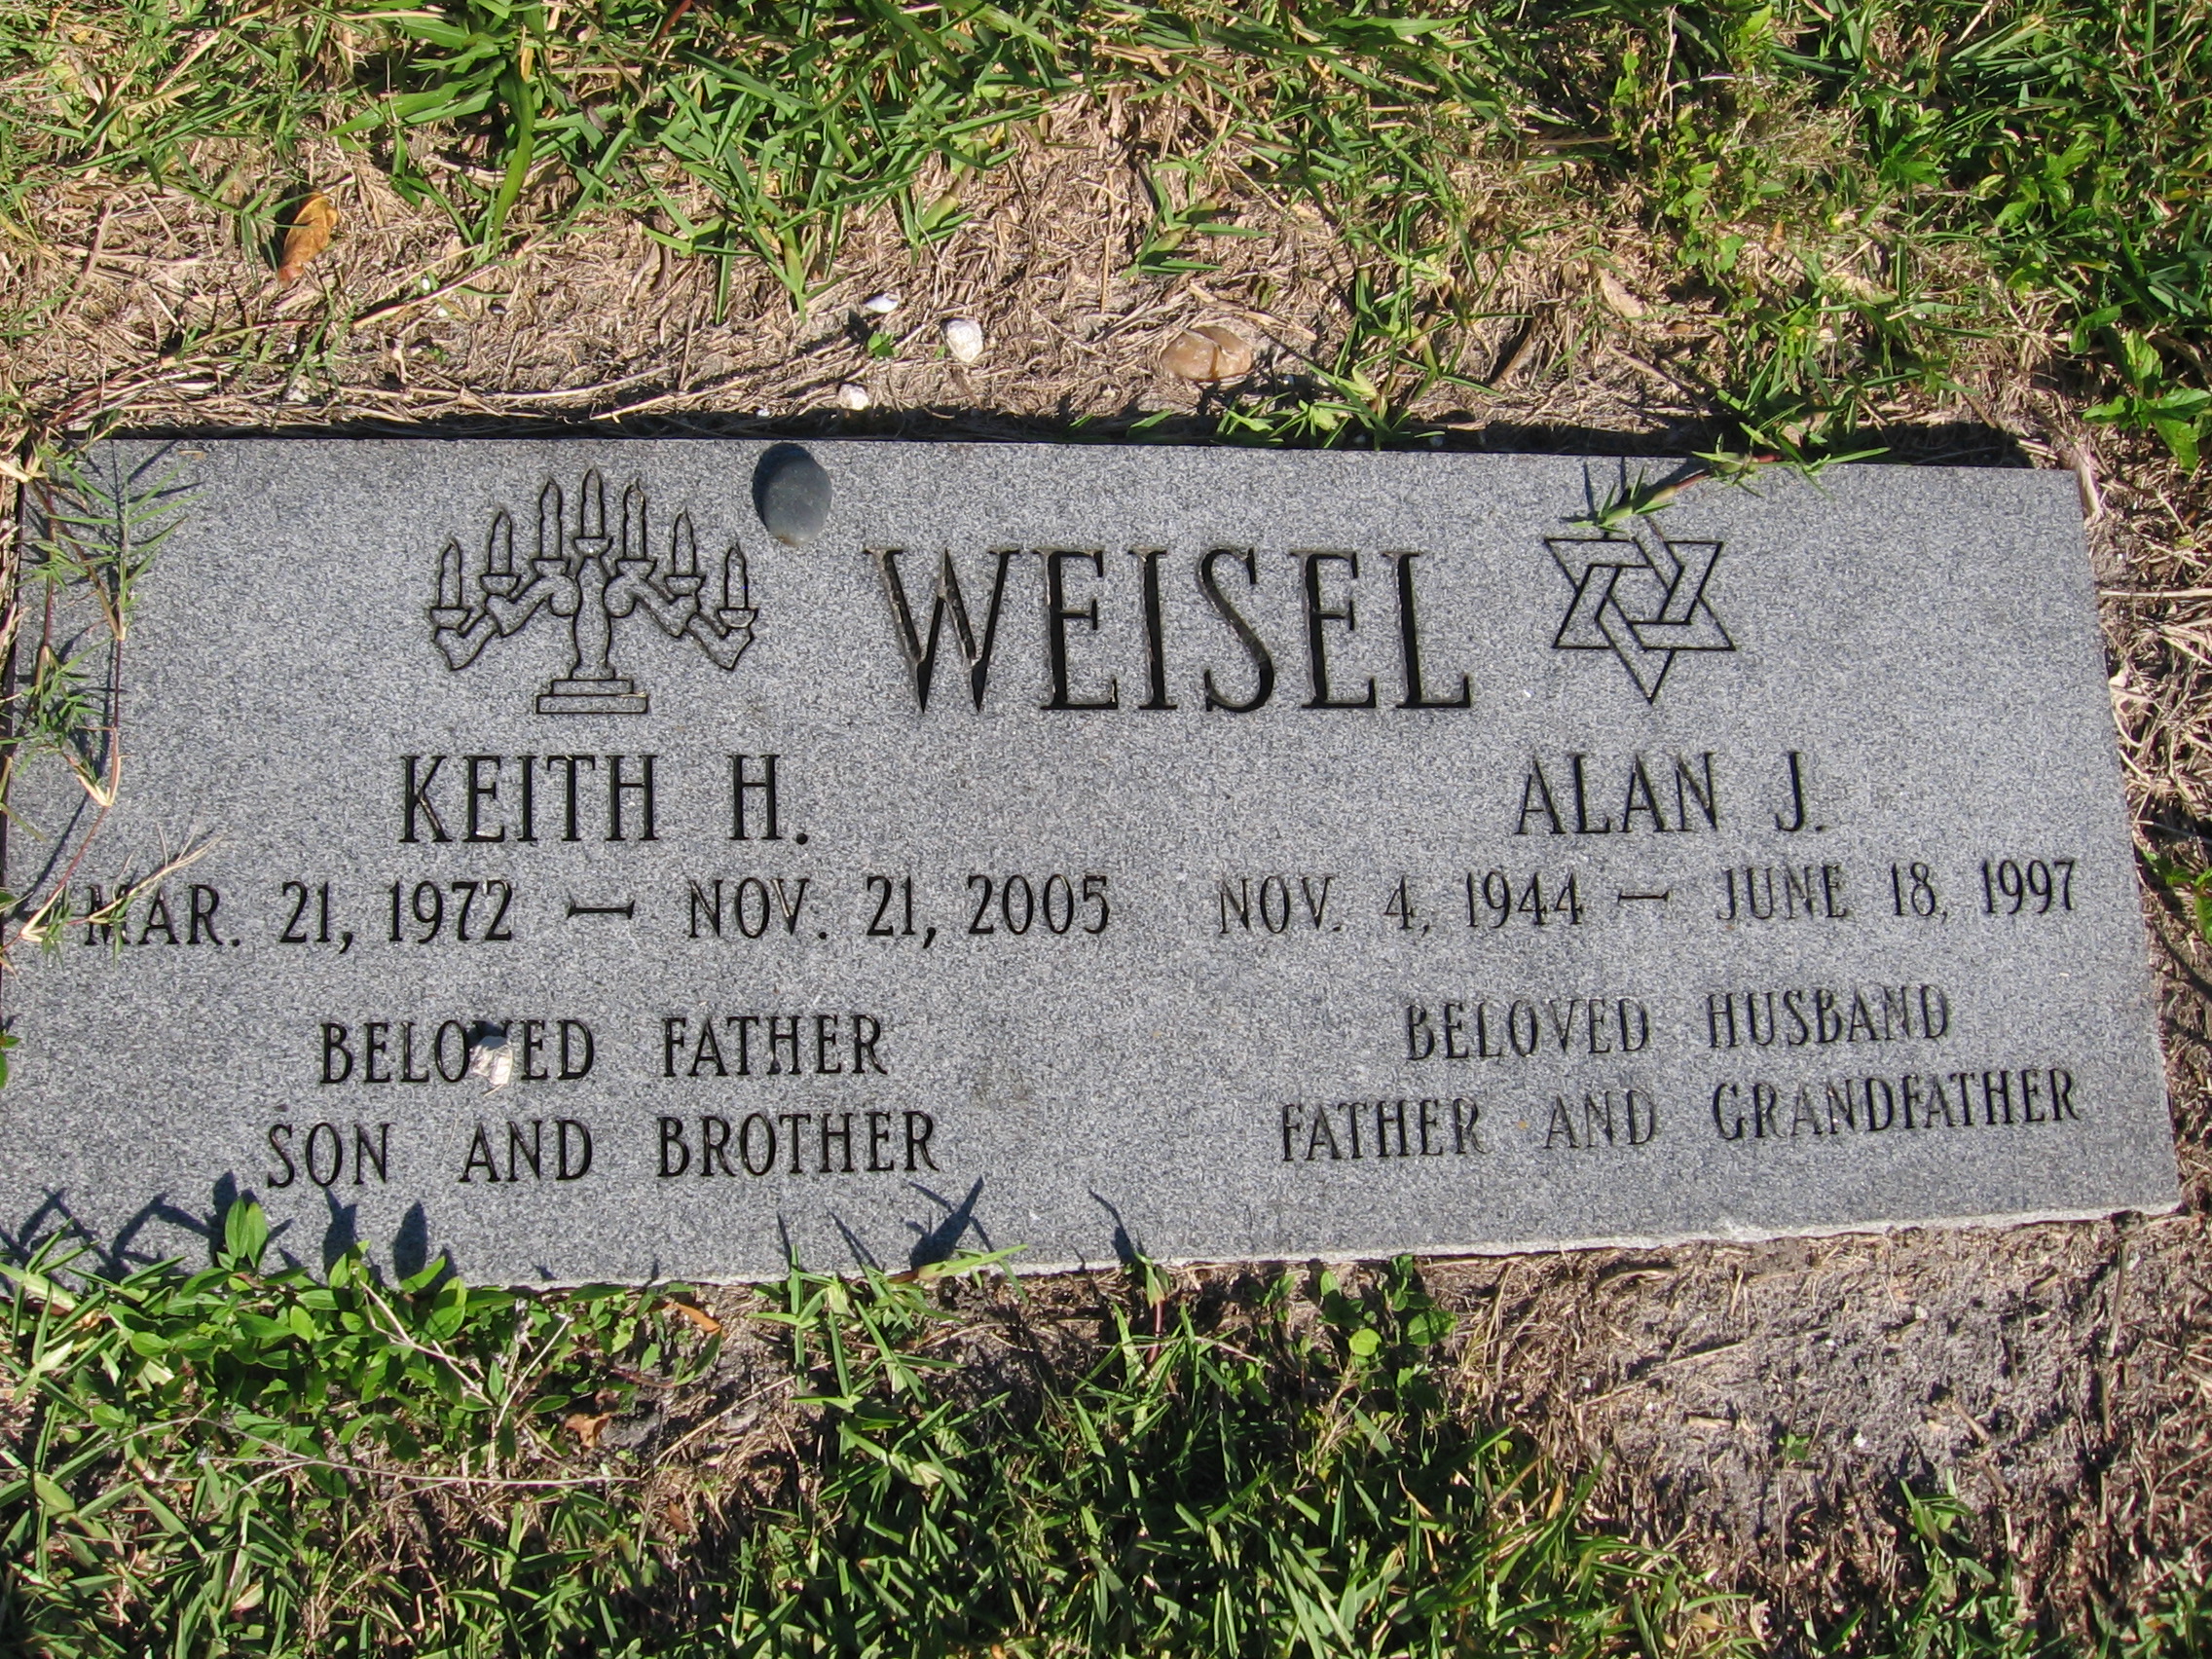 Keith H Weisel